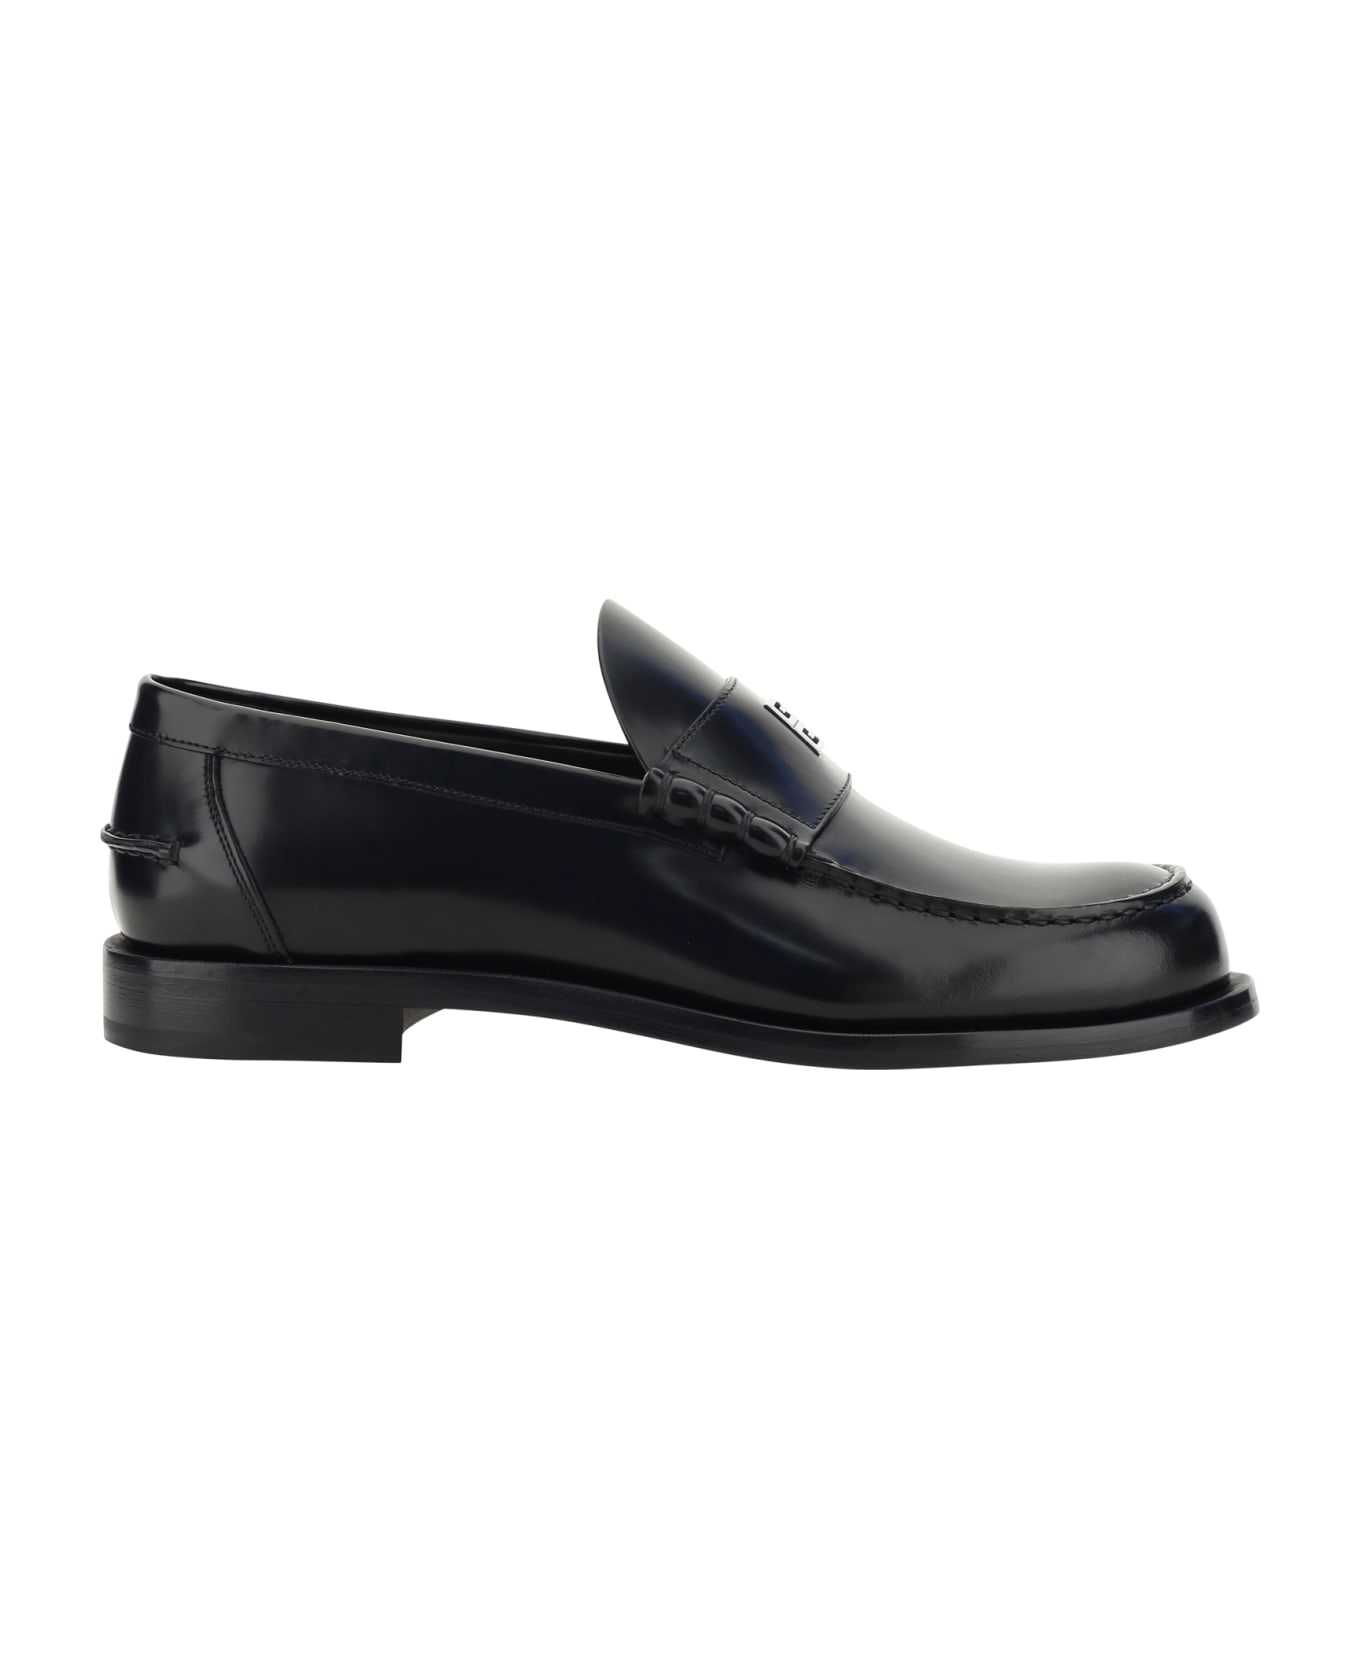 Givenchy Loafers - Black